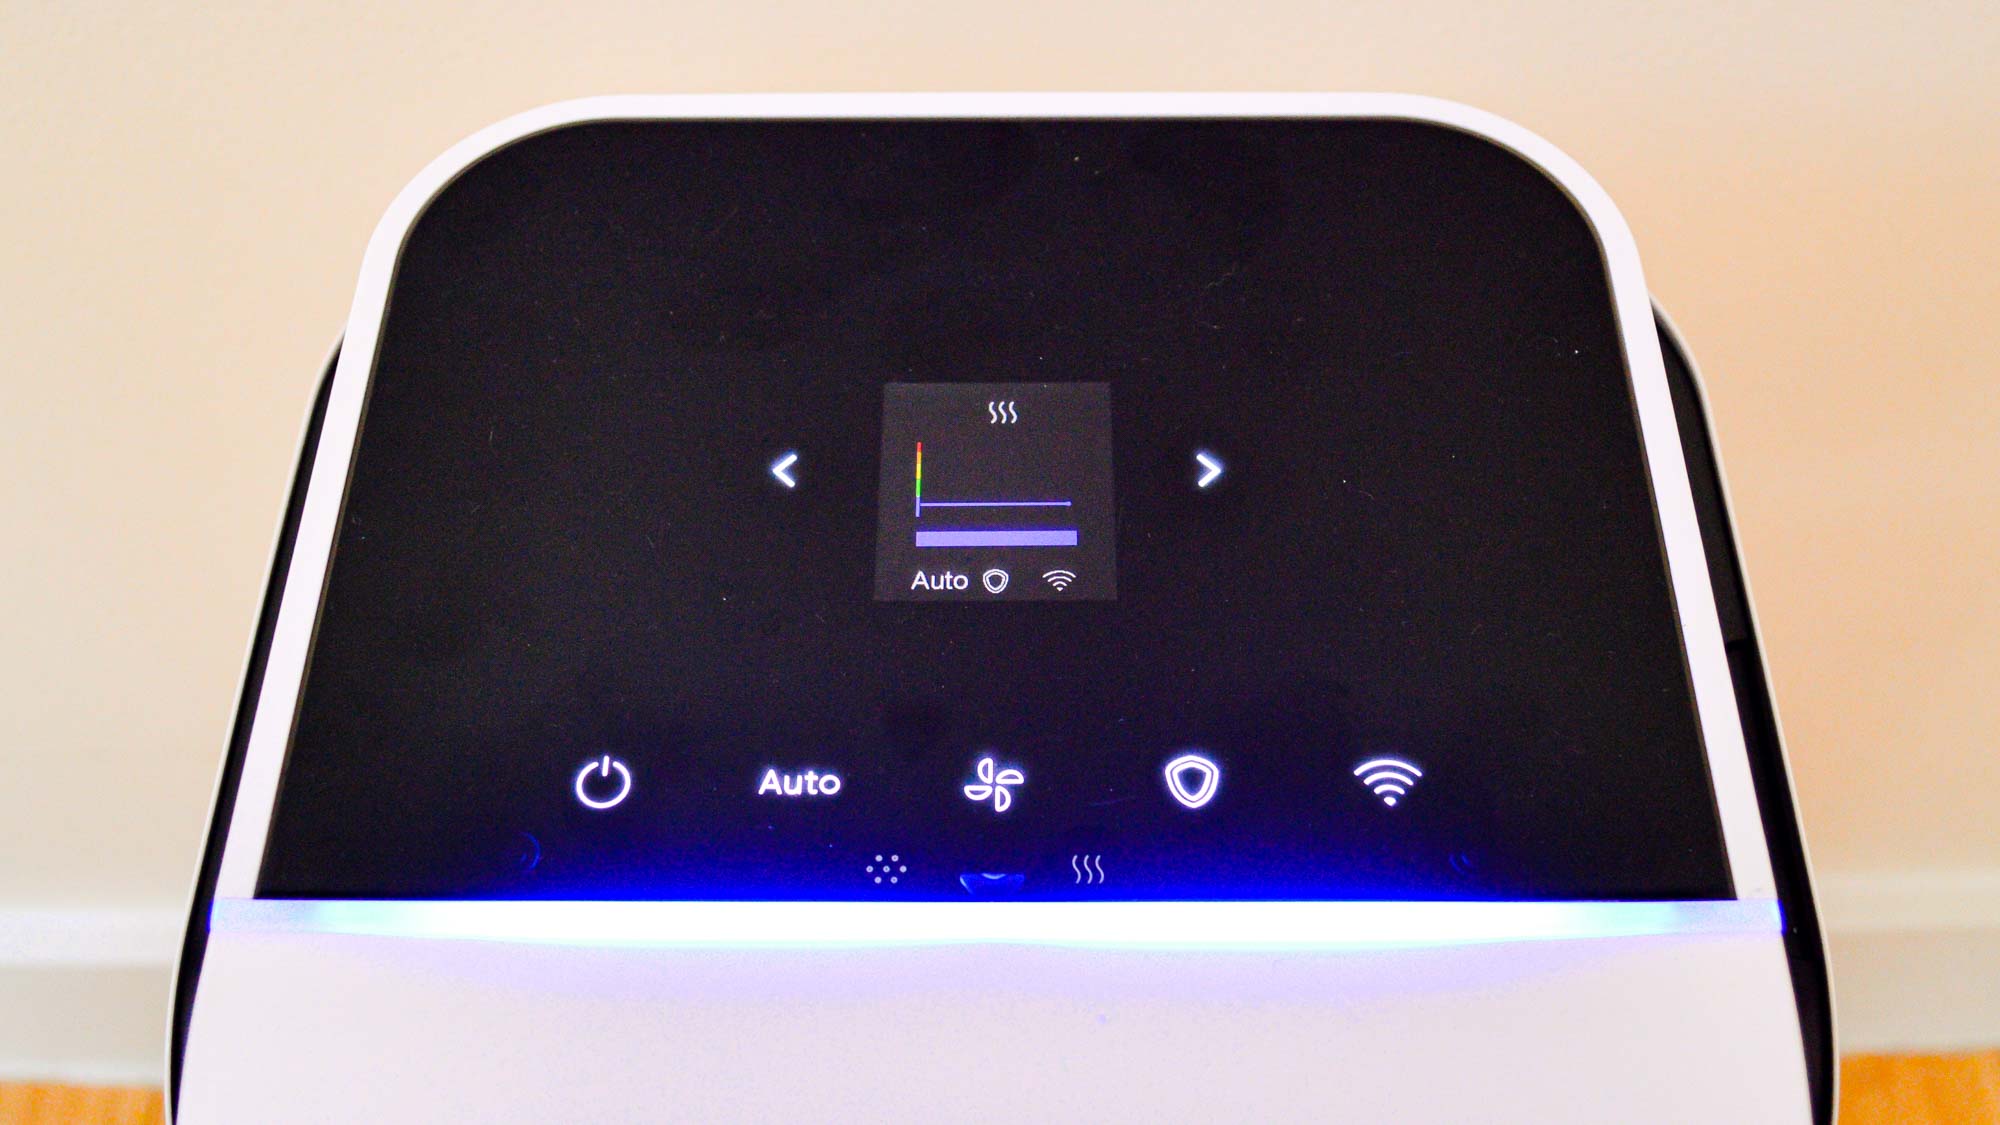 Control panel of the Blueair Health Protect 7470i air purifier